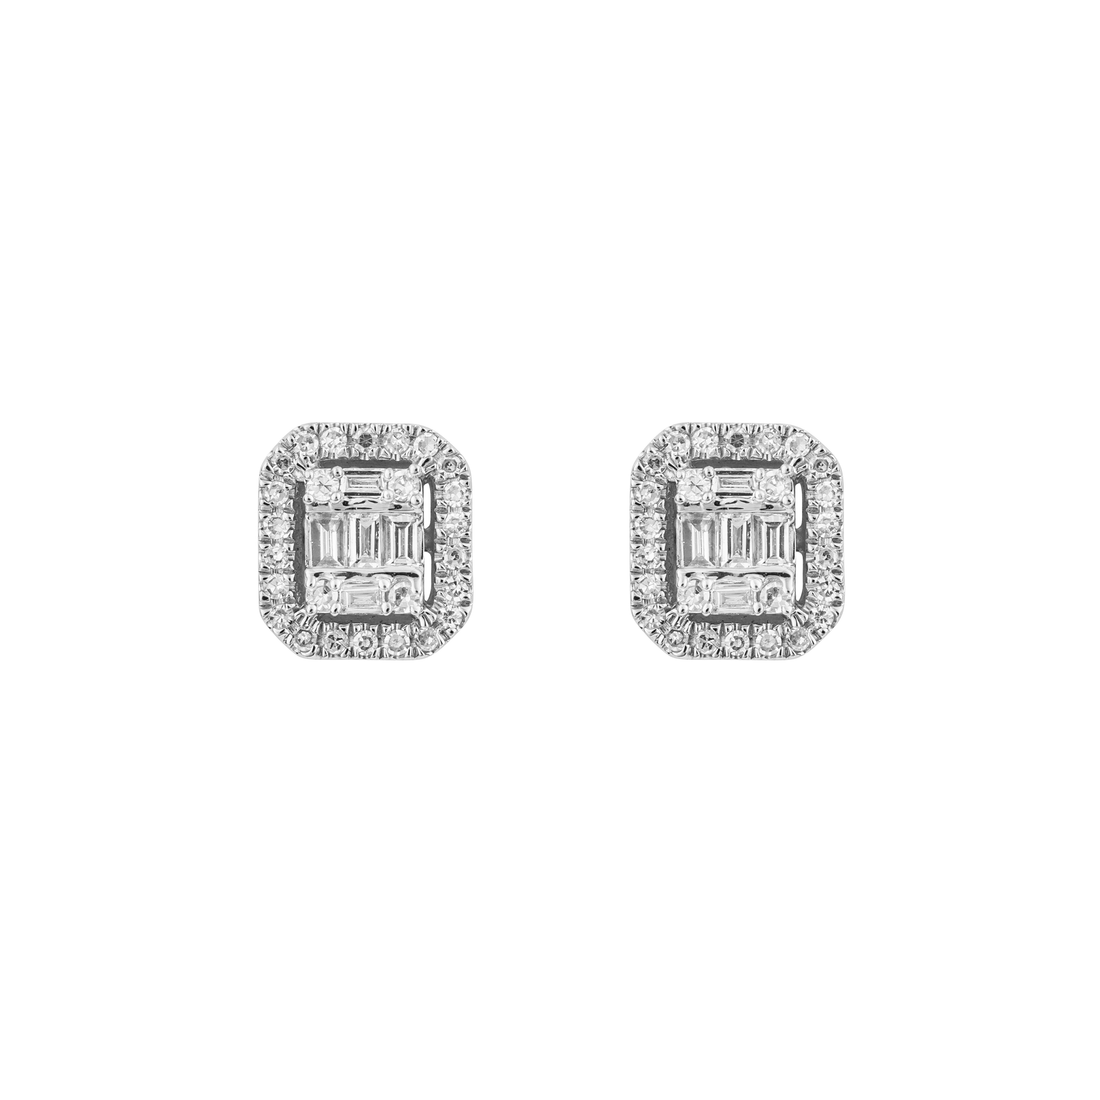 Pave Square Diamond Earrings in 9ct White Gold - Robert Anthony Jewellers, Edinburgh